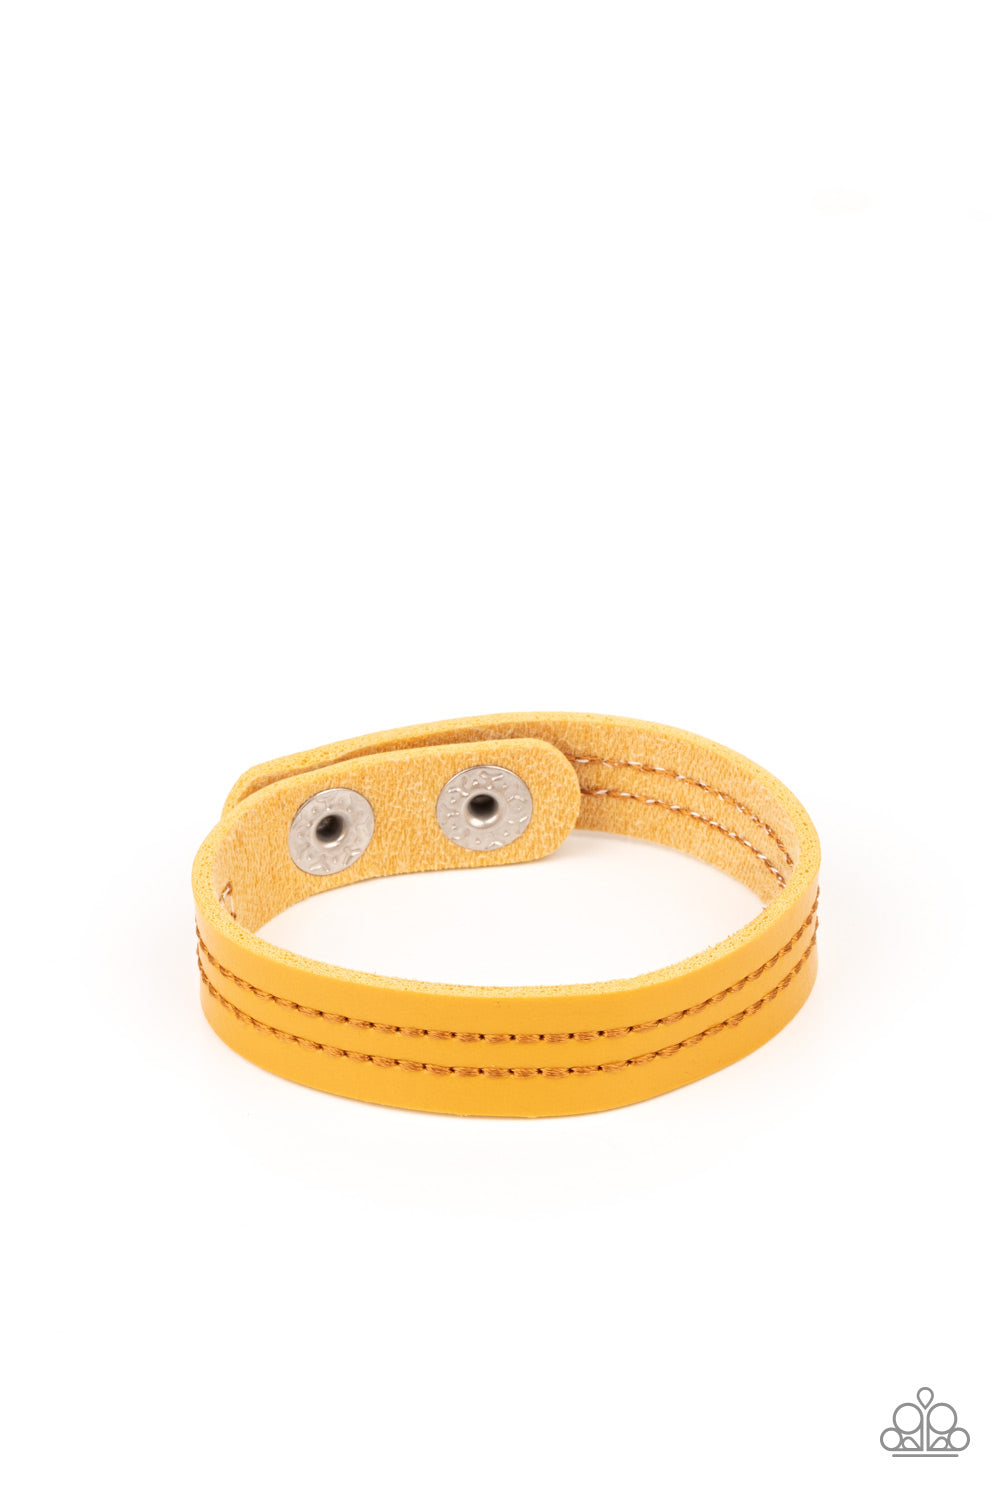 Life is WANDER-ful - Yellow - Jewelry - Paparazzi Accessories